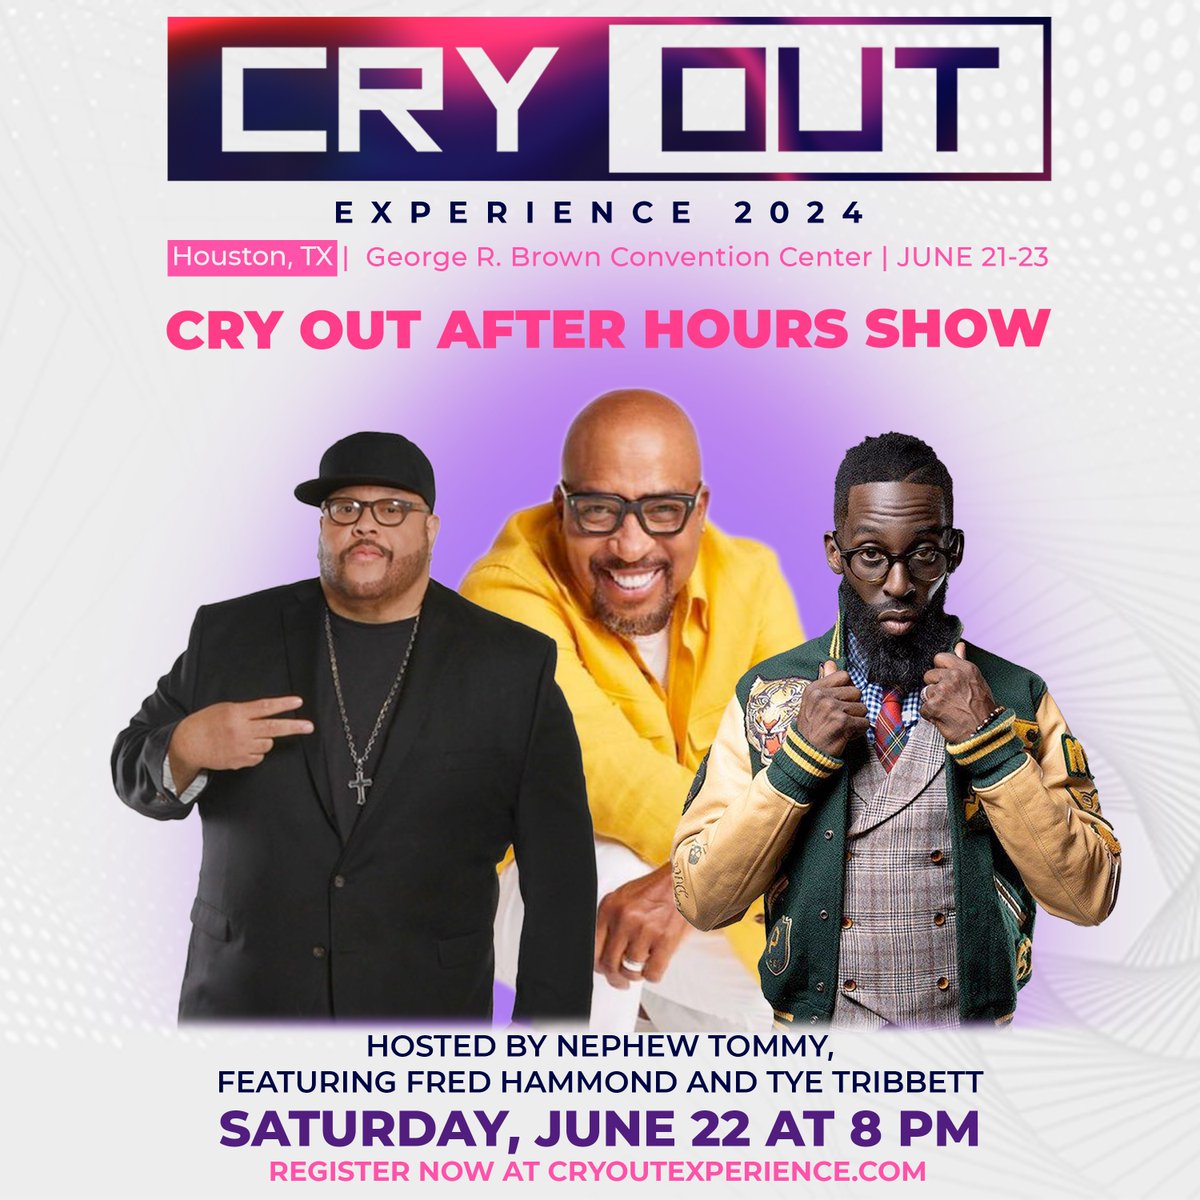 Exciting news for Cry Out Experience 2024! Hosted by @nephewtommy with performances by @tyetribbett and @realfredhammond. Join us in Houston, Texas, June 21-23! Early Bird registration: CryOutExperience.com 

#CryOut2024 #CryOutExperience2024 #GospelConcert #ComedyShow